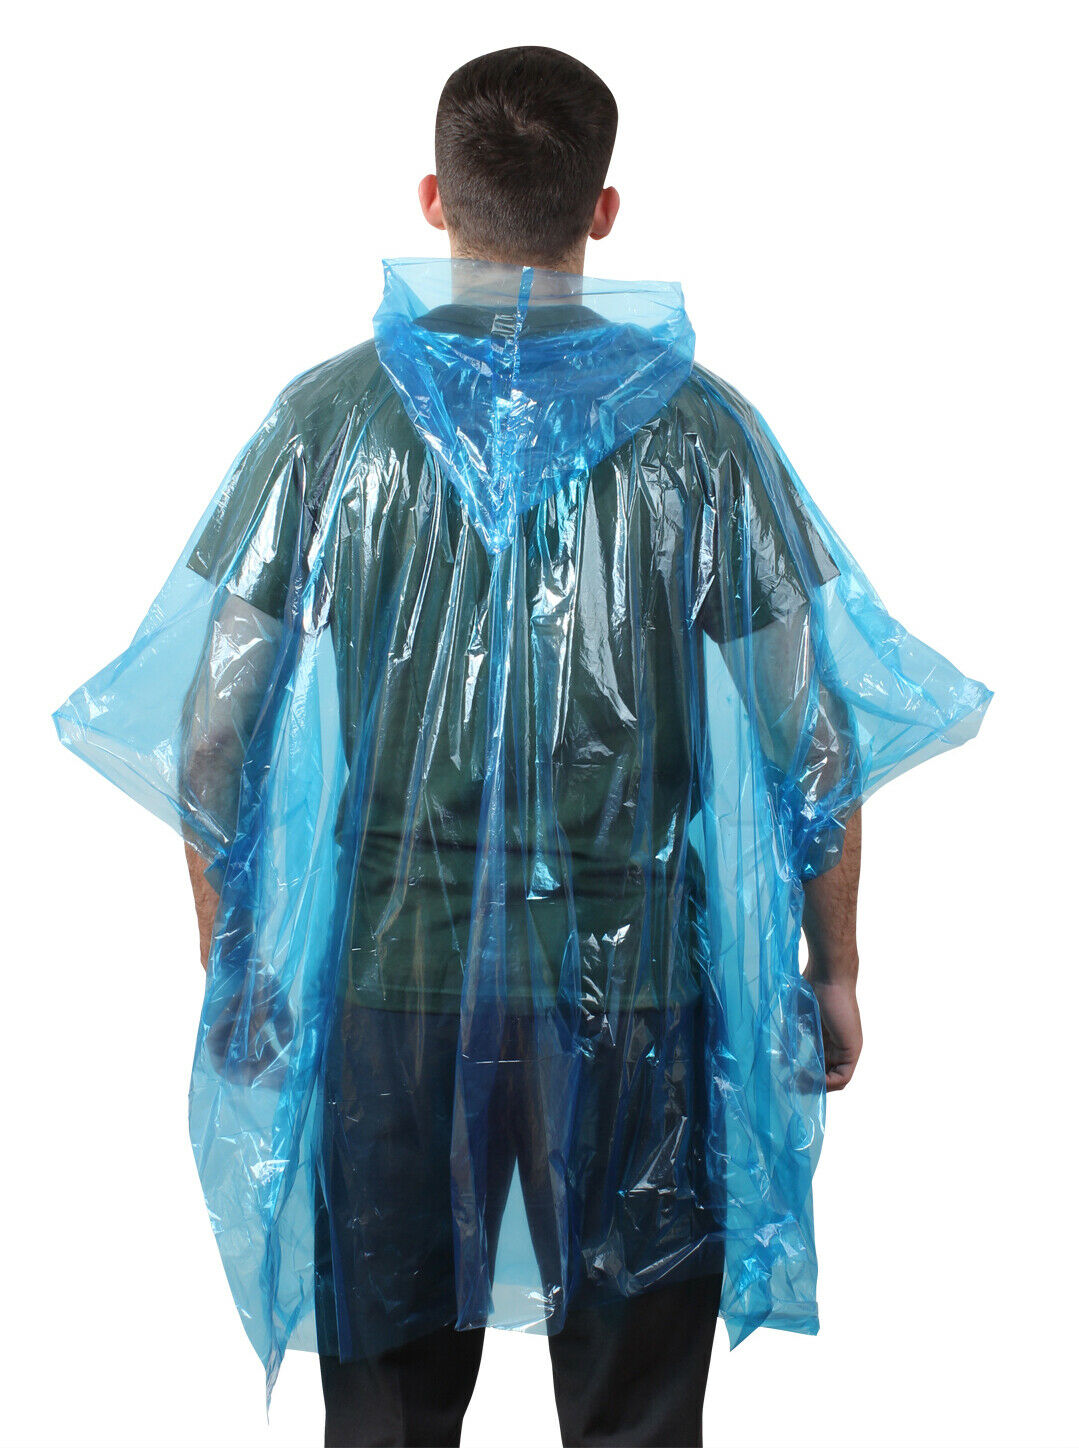 20 Pack Rothco All Weather Emergency Poncho